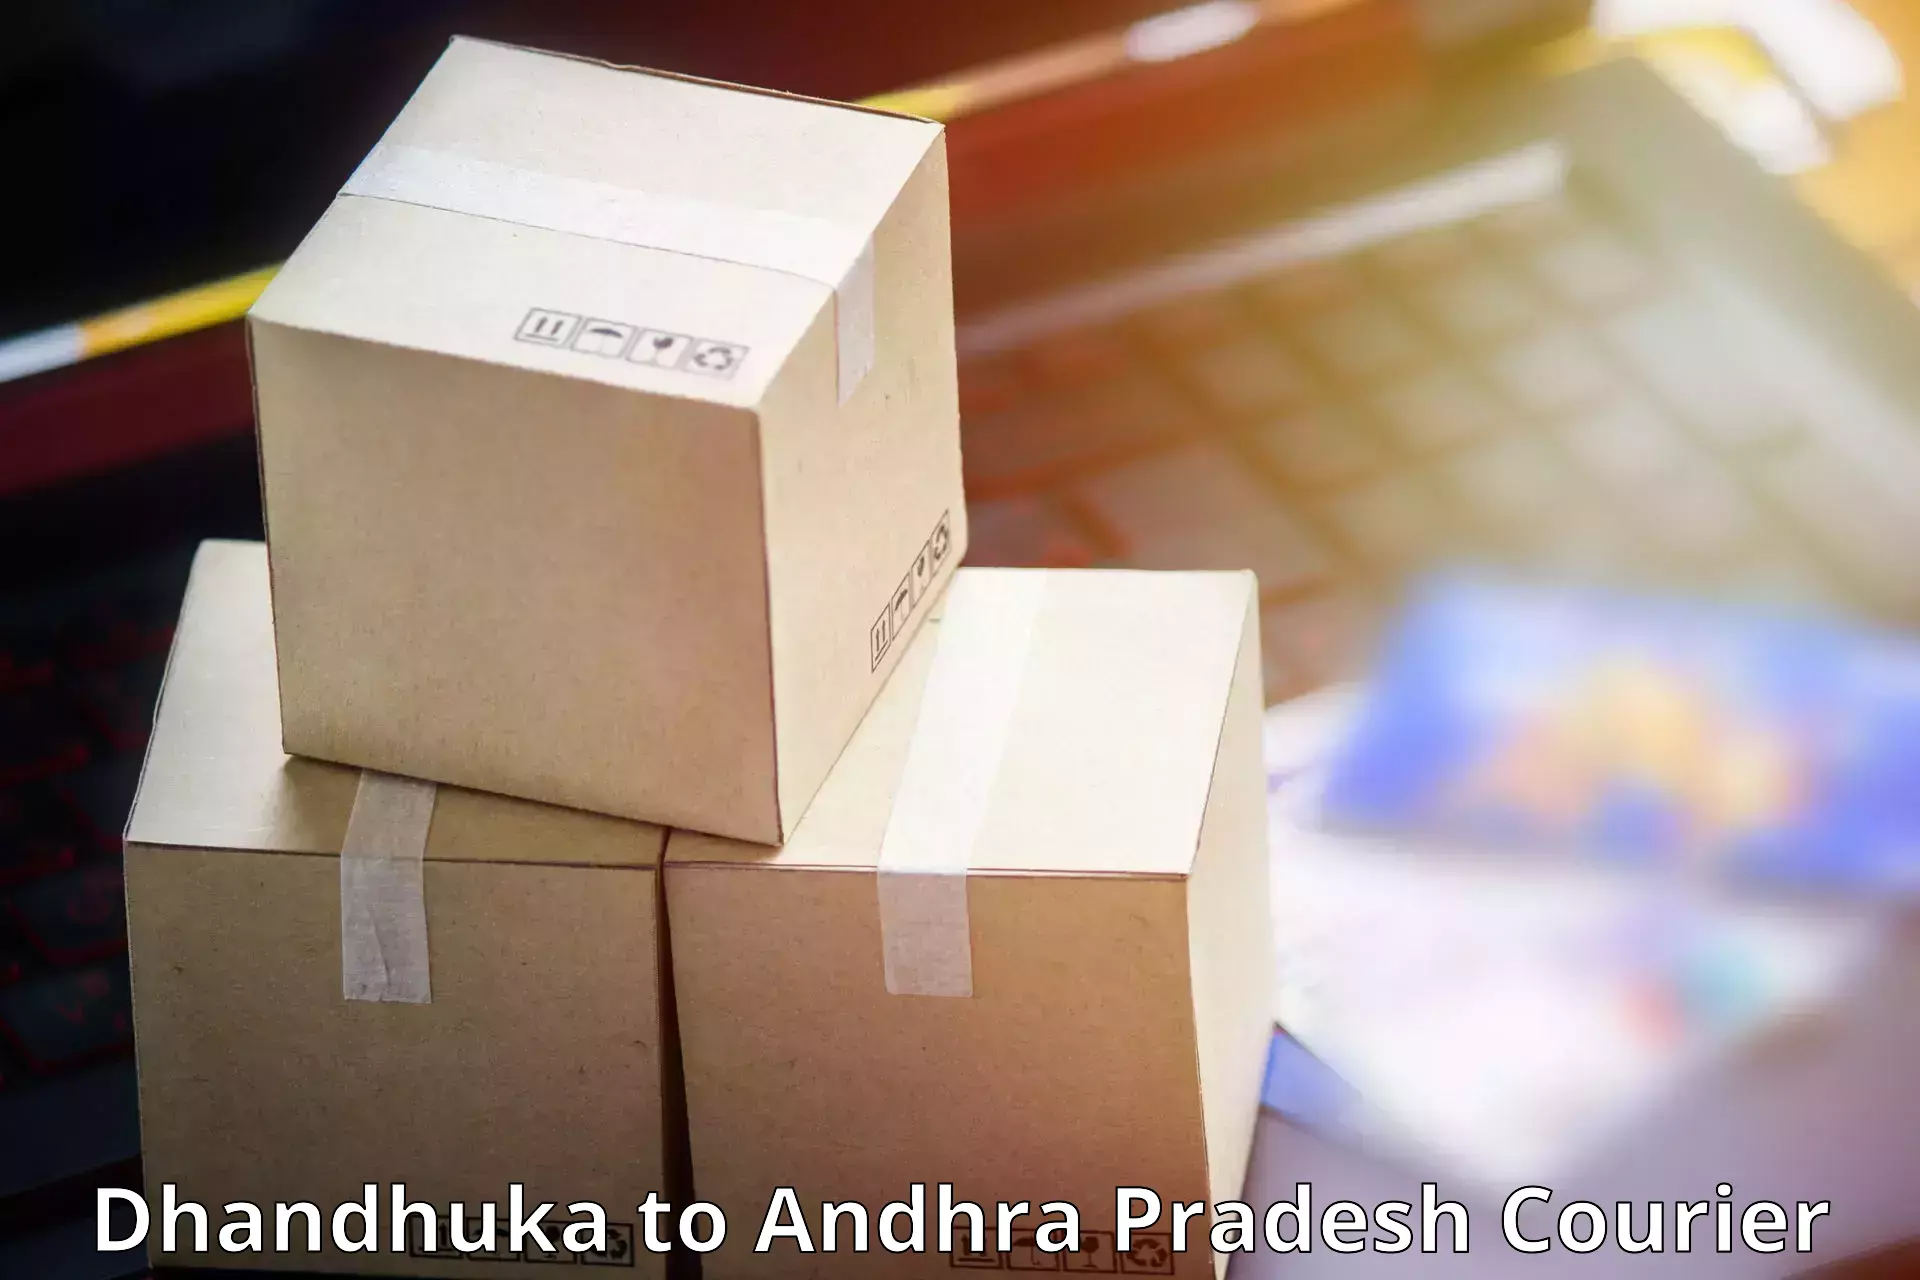 Modern courier technology Dhandhuka to Visakhapatnam